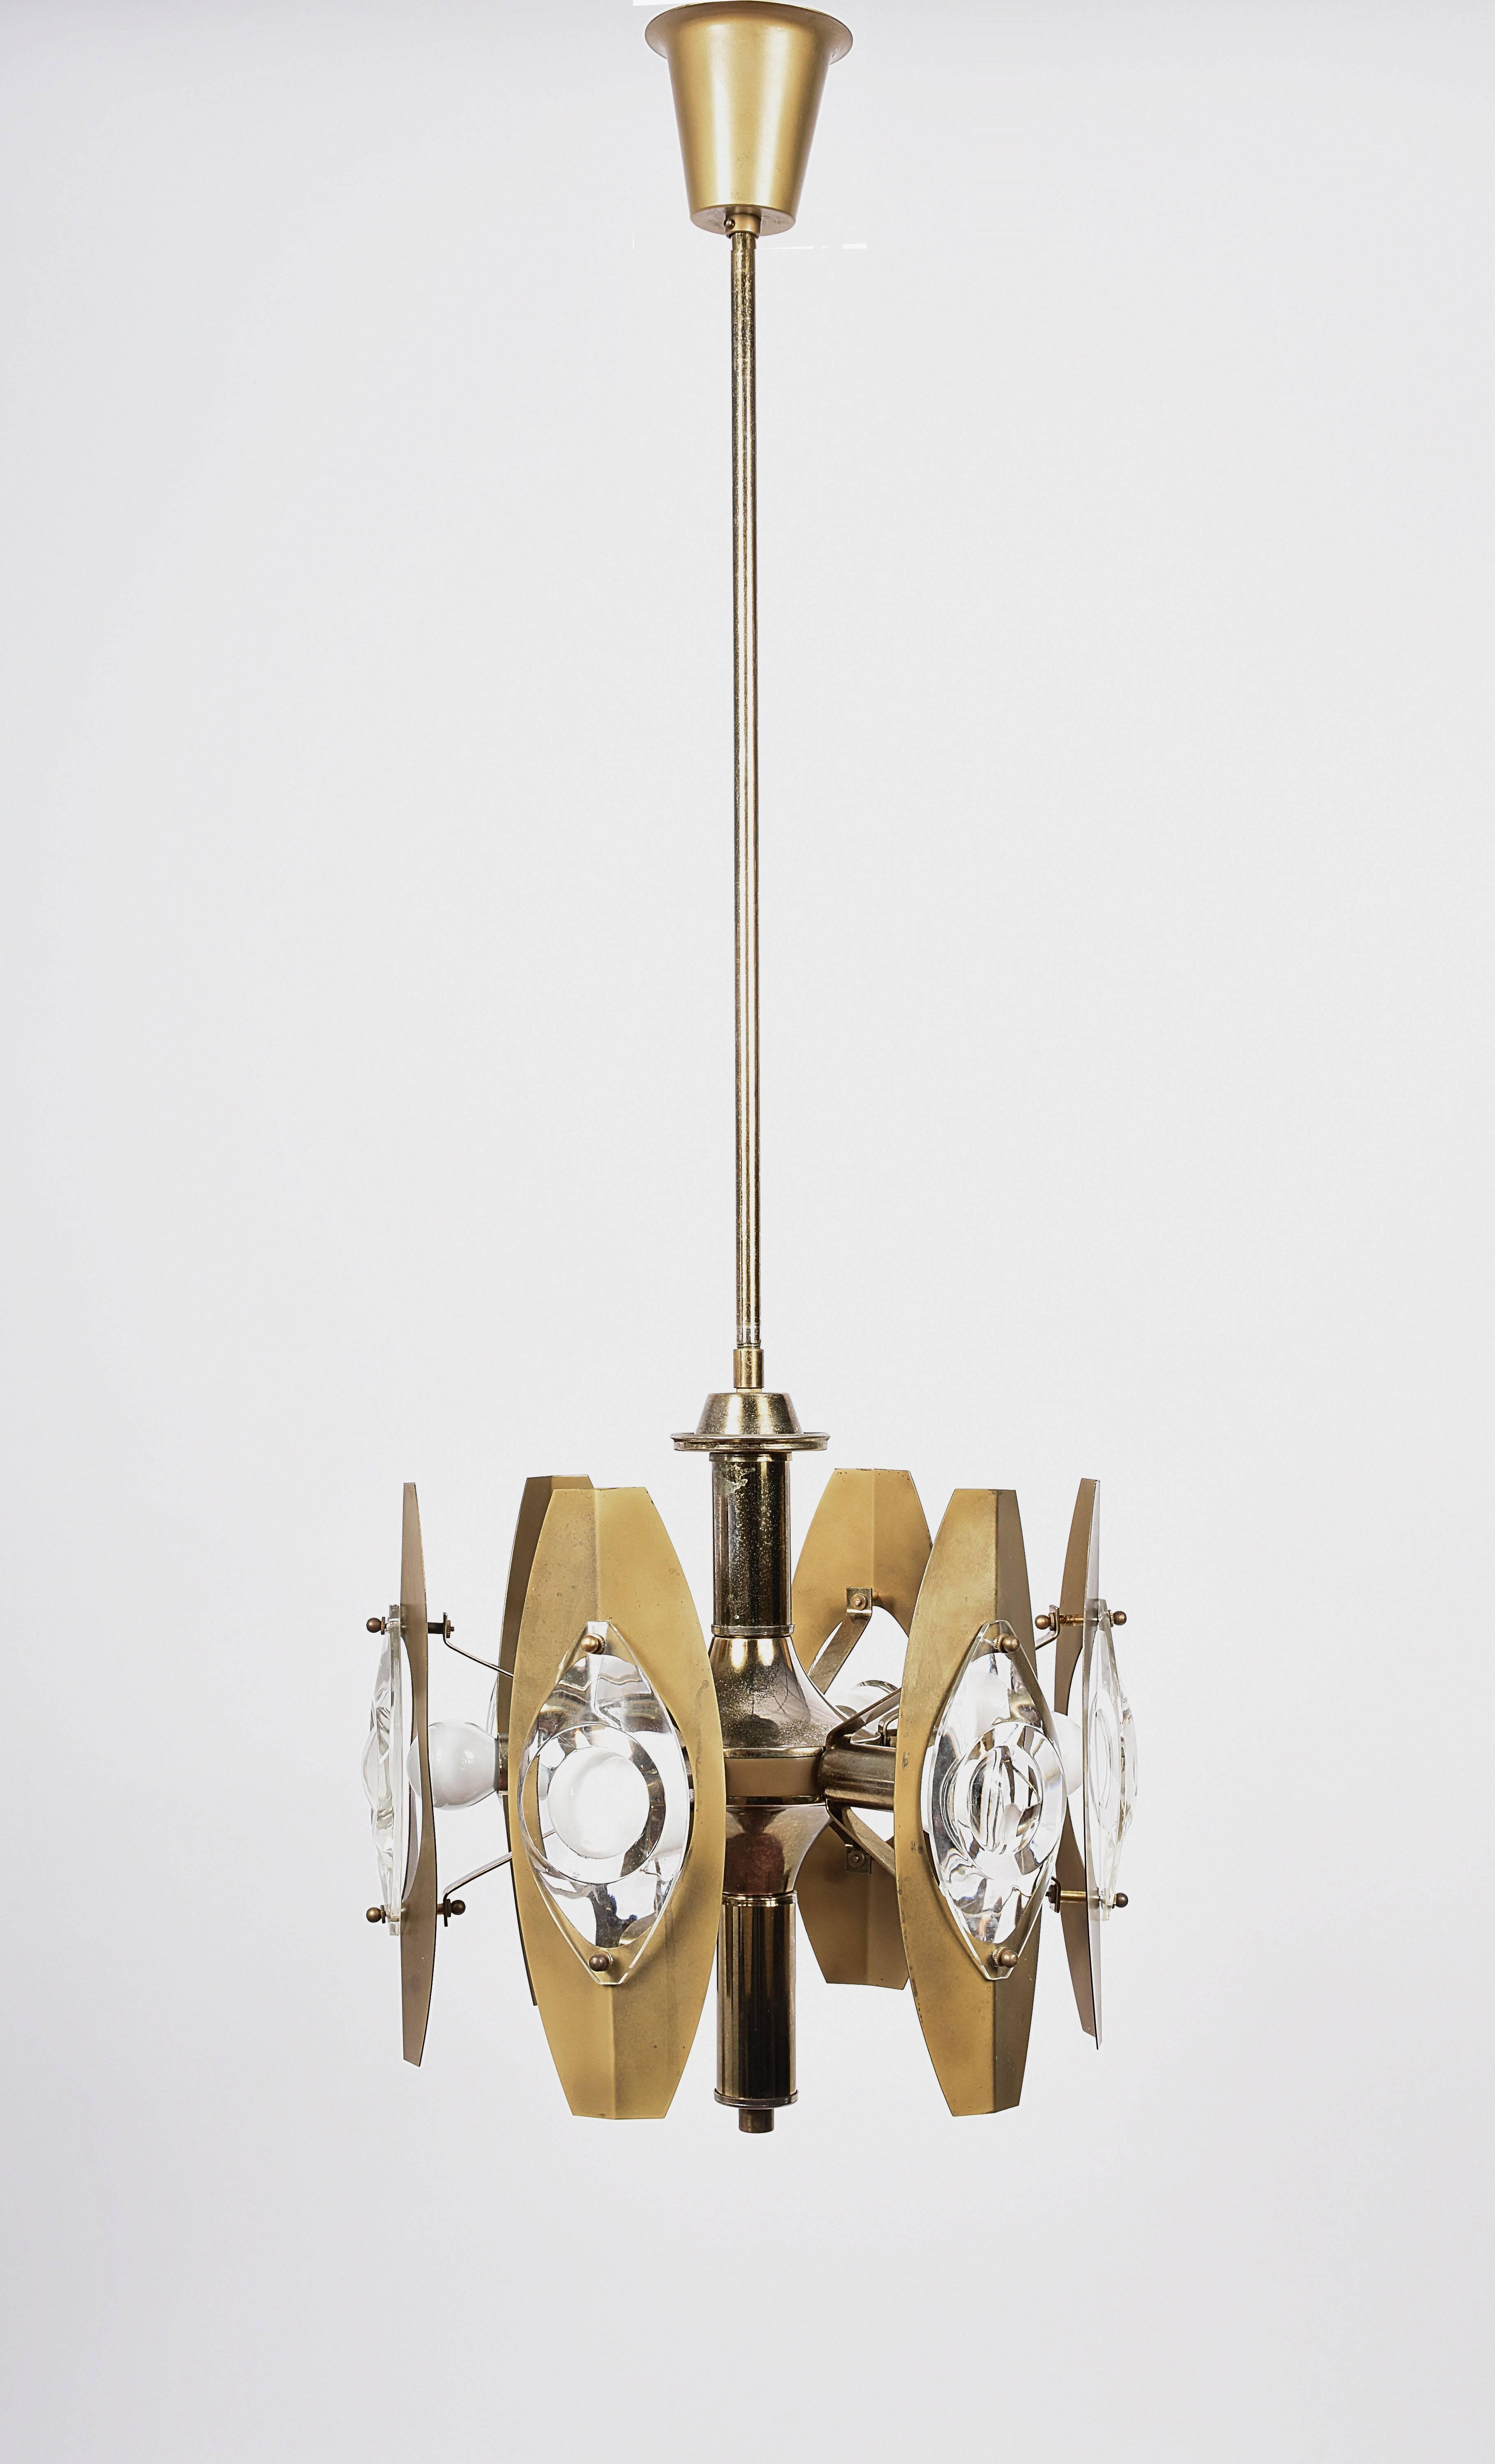 Wonderful Italian chandelier produced by Oscar Torlasco, manufactured in Italy during 1960s. 

This amazing chandelier has six polished gilded brass-framed arms which hold large glass lenses and sockets for small base bulbs or LEDs with maximum